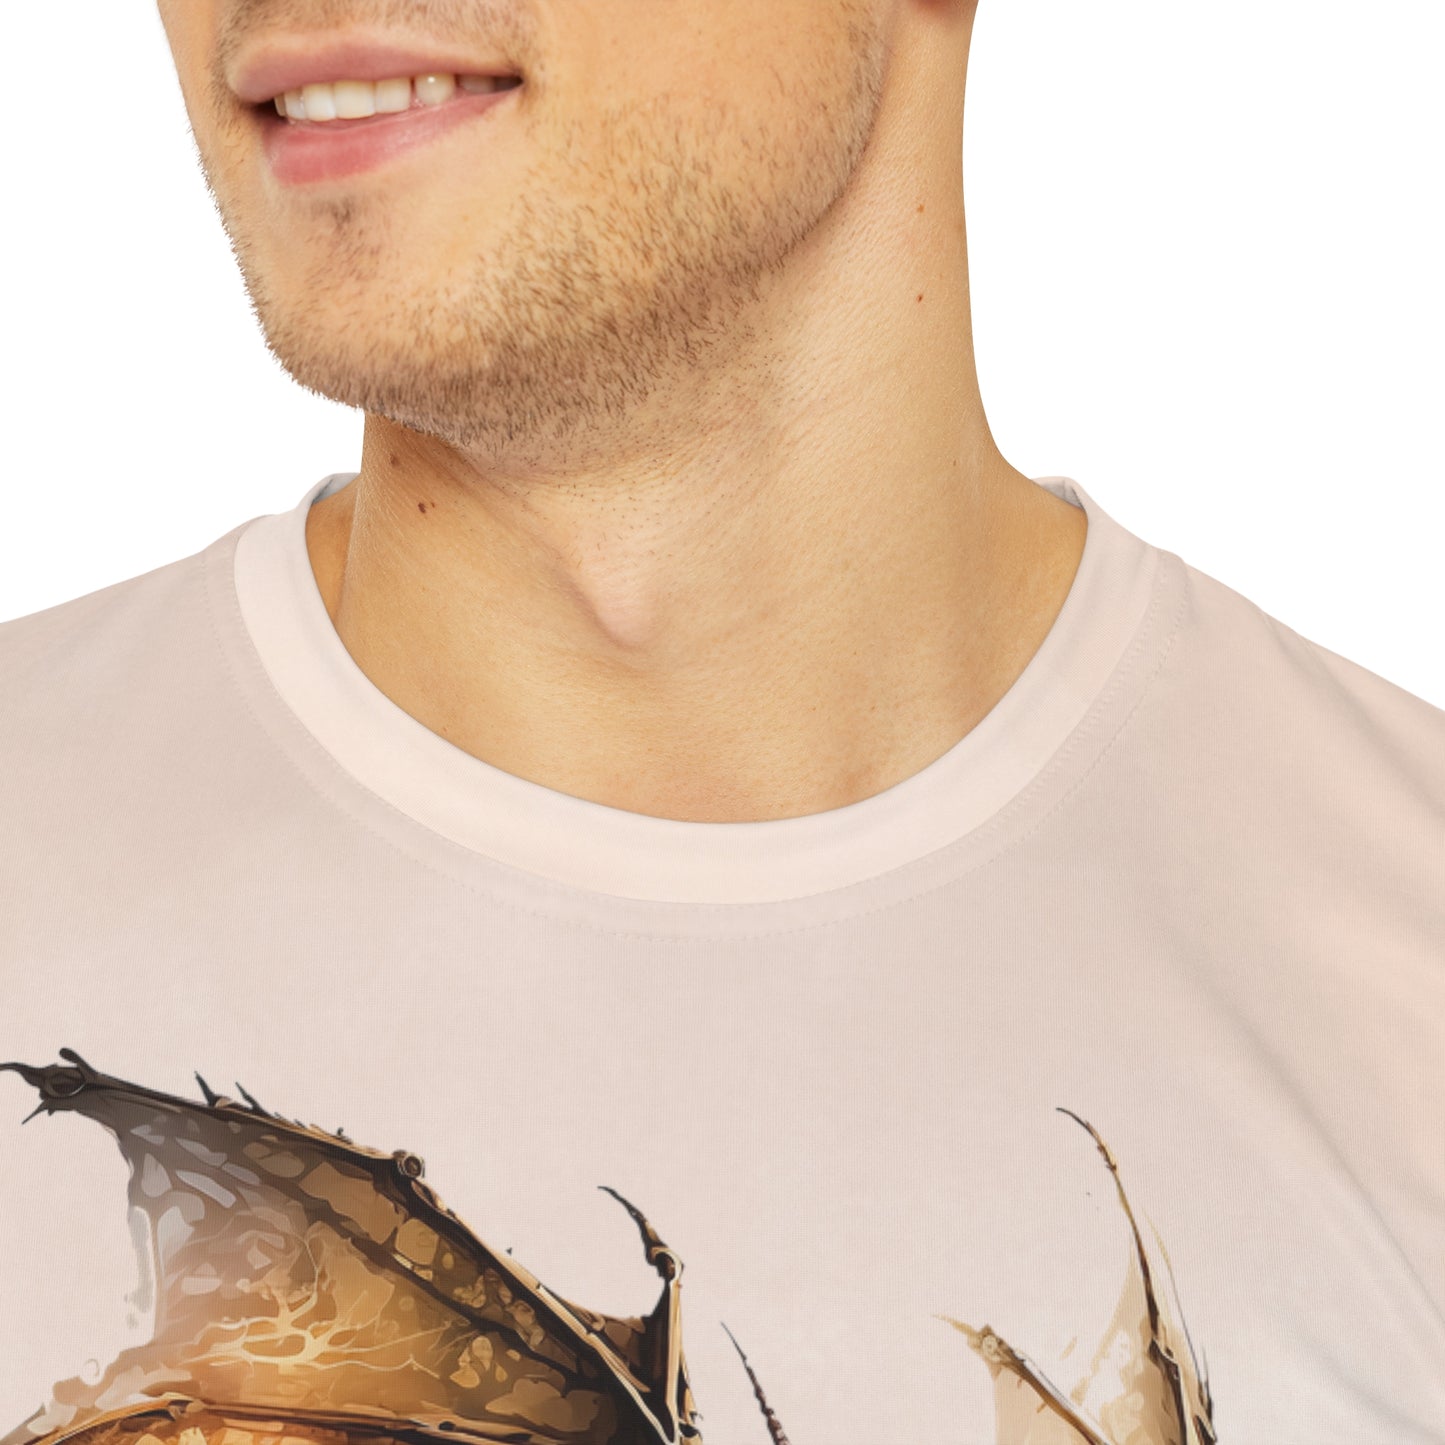 Dragon on Watercolor Background T-shirt